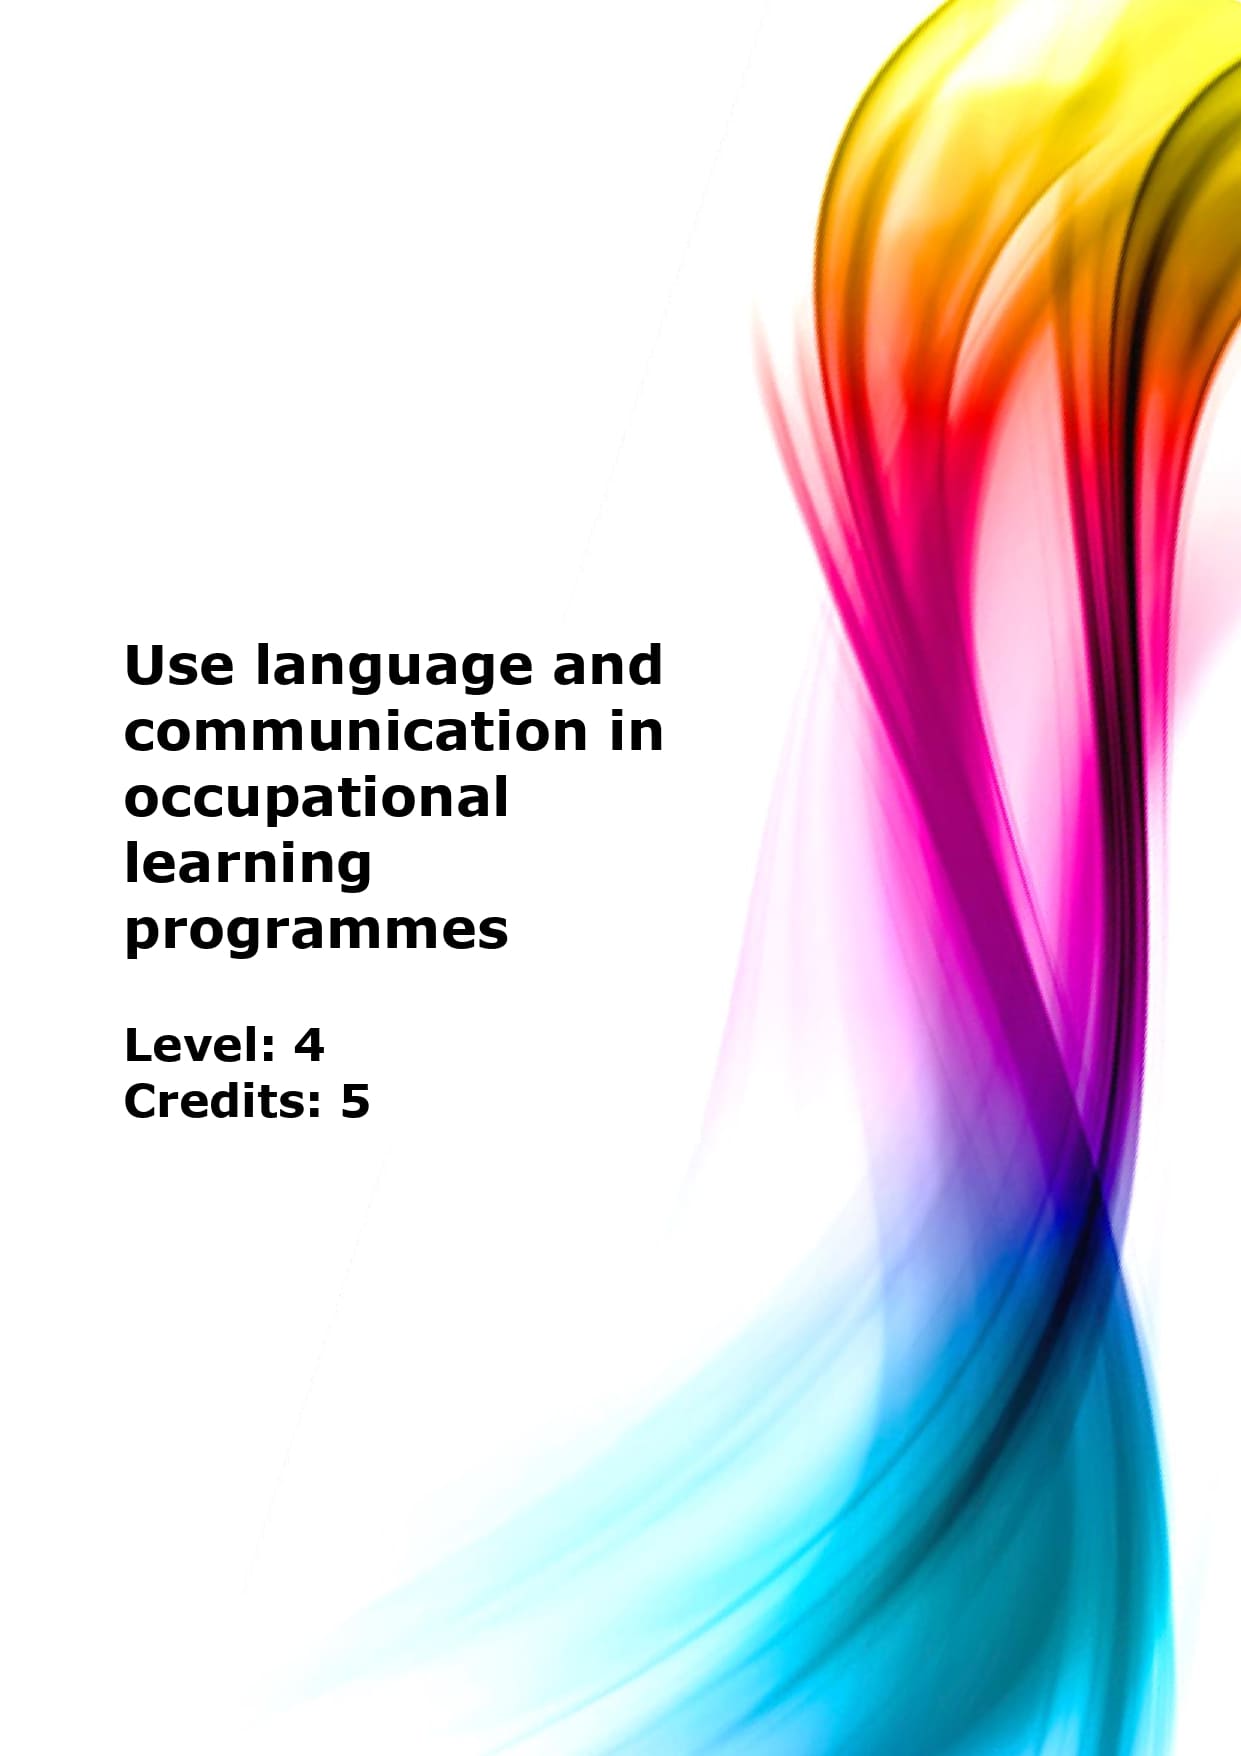 Use language and communication in occupational learning programmes L4 US